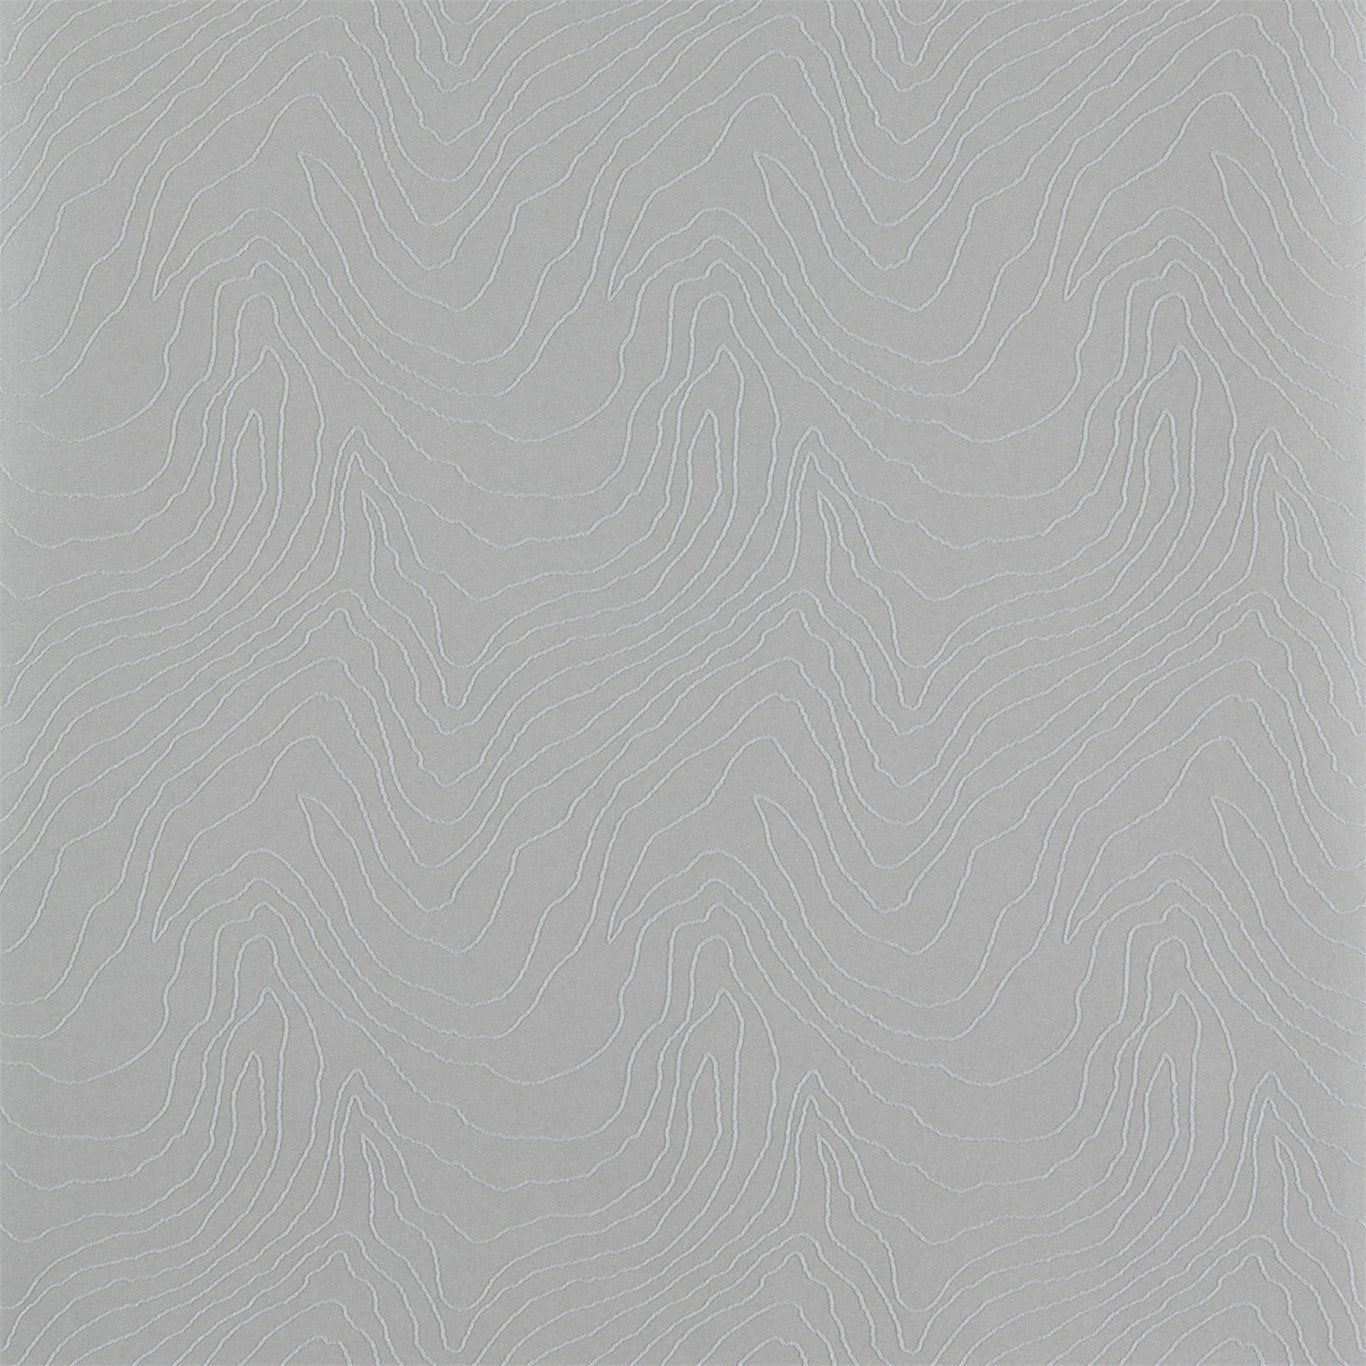 Formation Shimmer Silver Wallpaper HMFW111592 by Harlequin